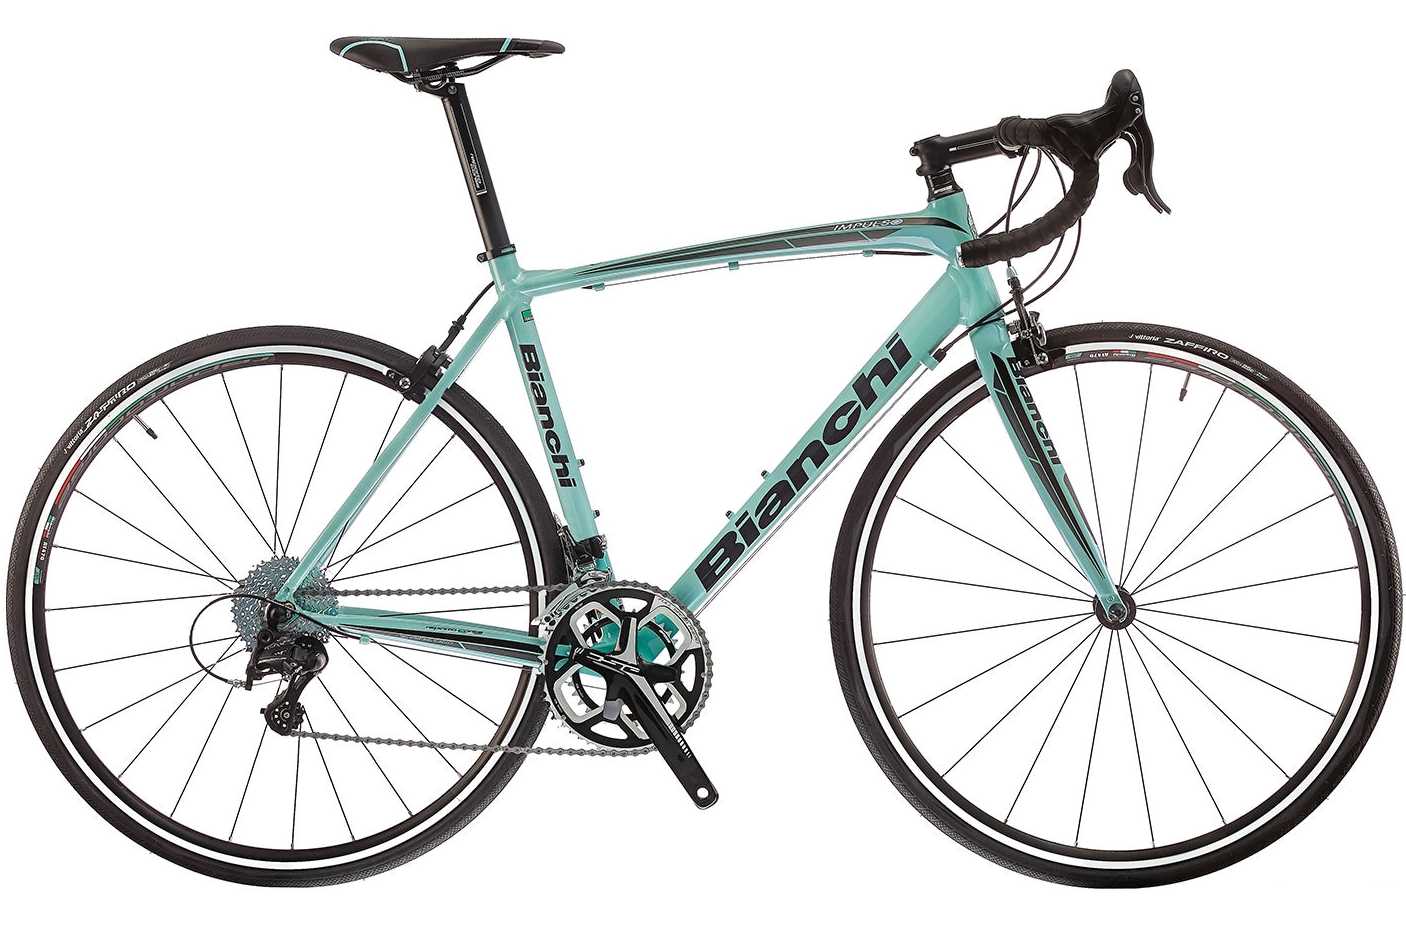 Bianchi 2018 road bikes: which model is right for you?